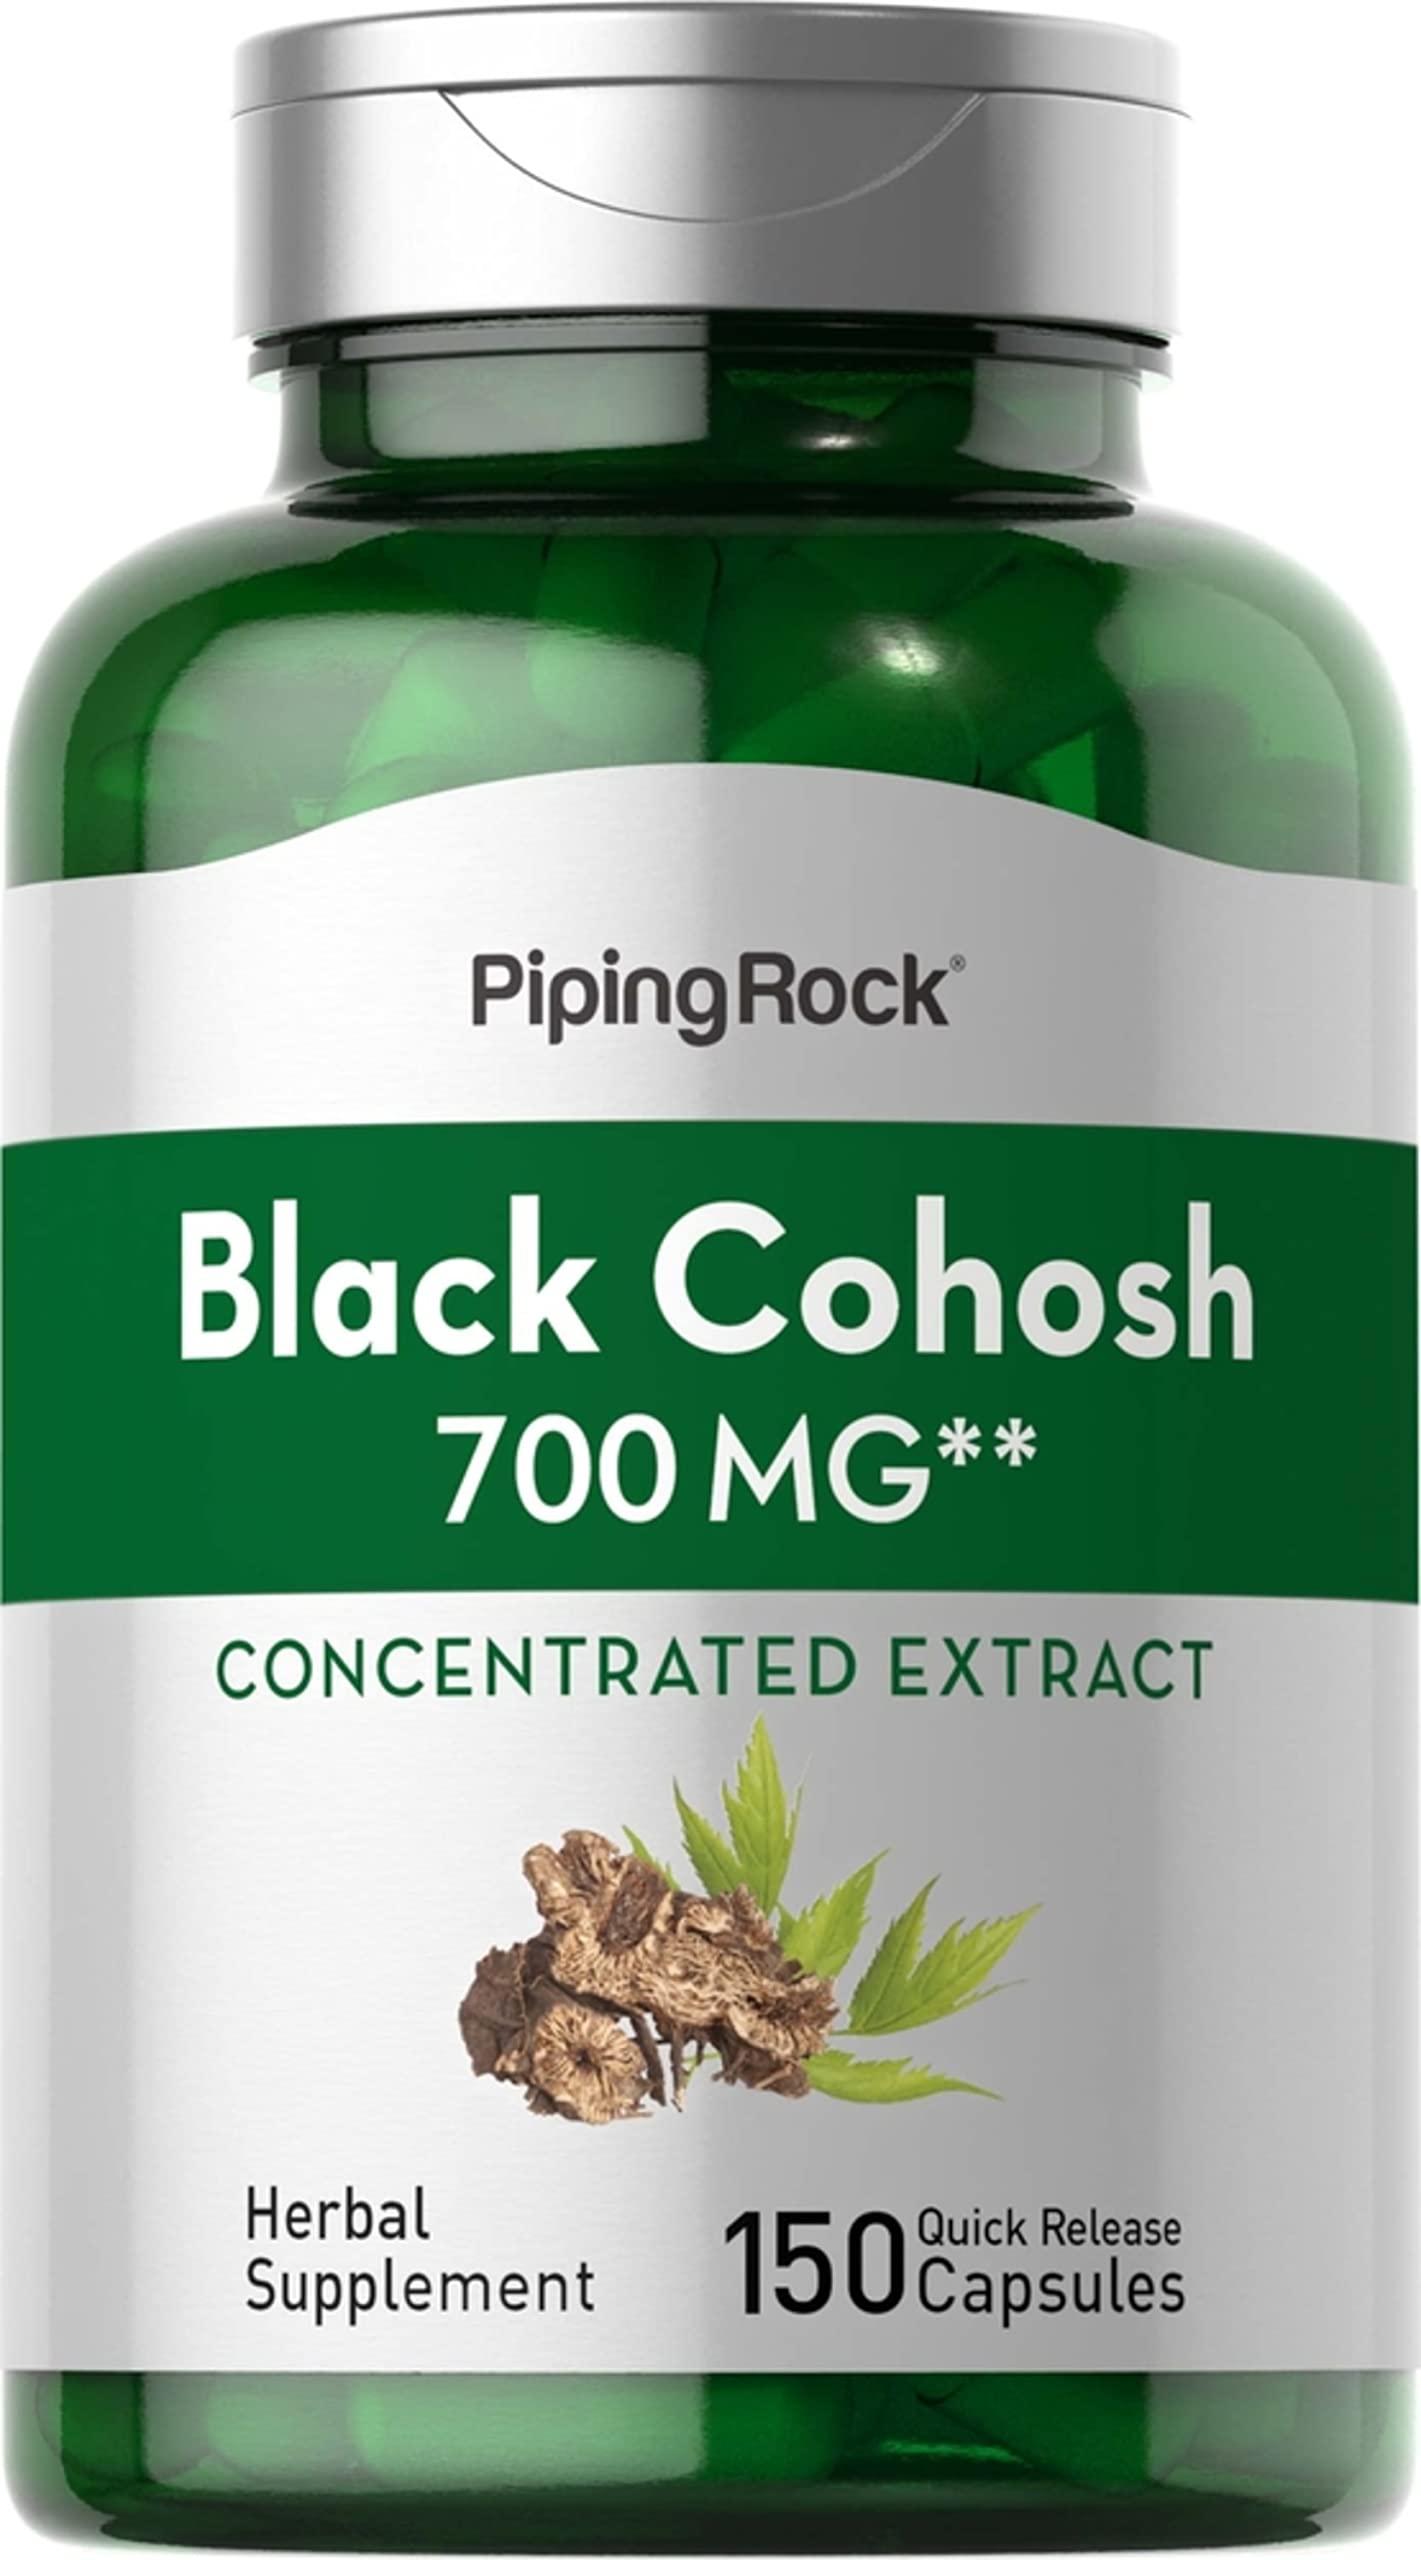 Piping Rock Black Cohosh 700 mg | 150 Capsules | Non-GMO, Gluten Free Supplement